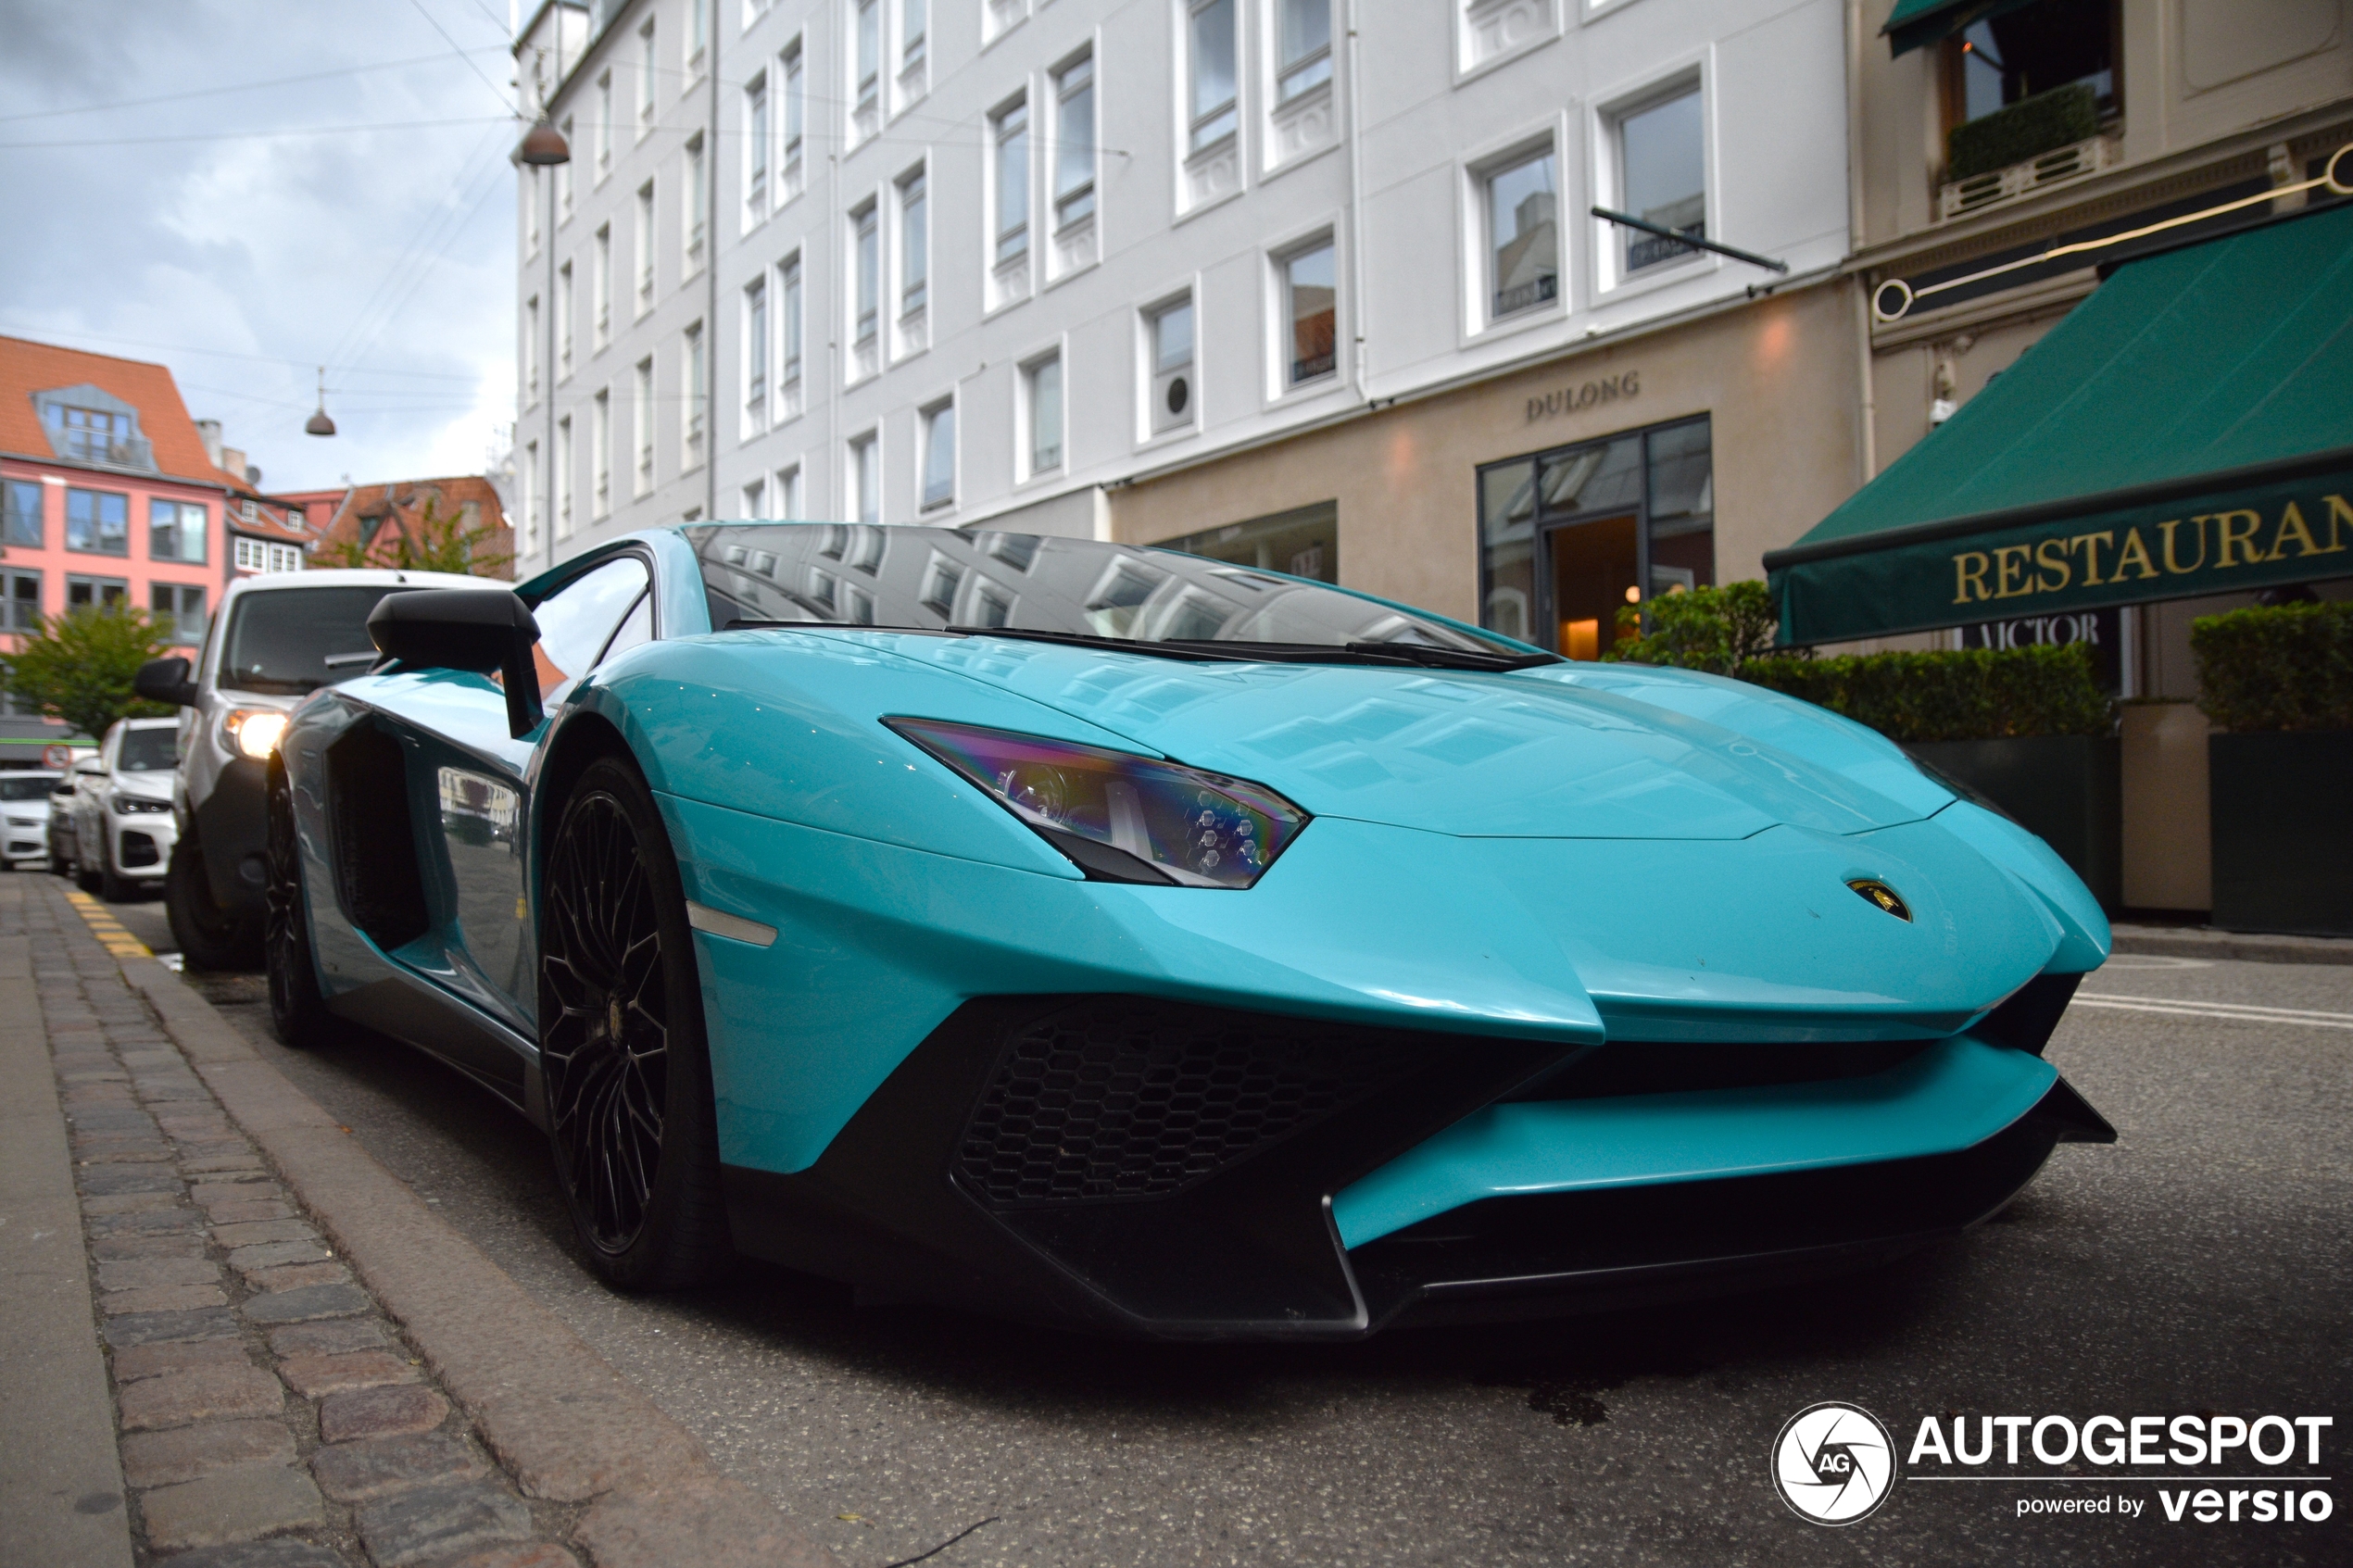 A beautiful Aventador LP750-4 SuperVeloce shows up in Denmark